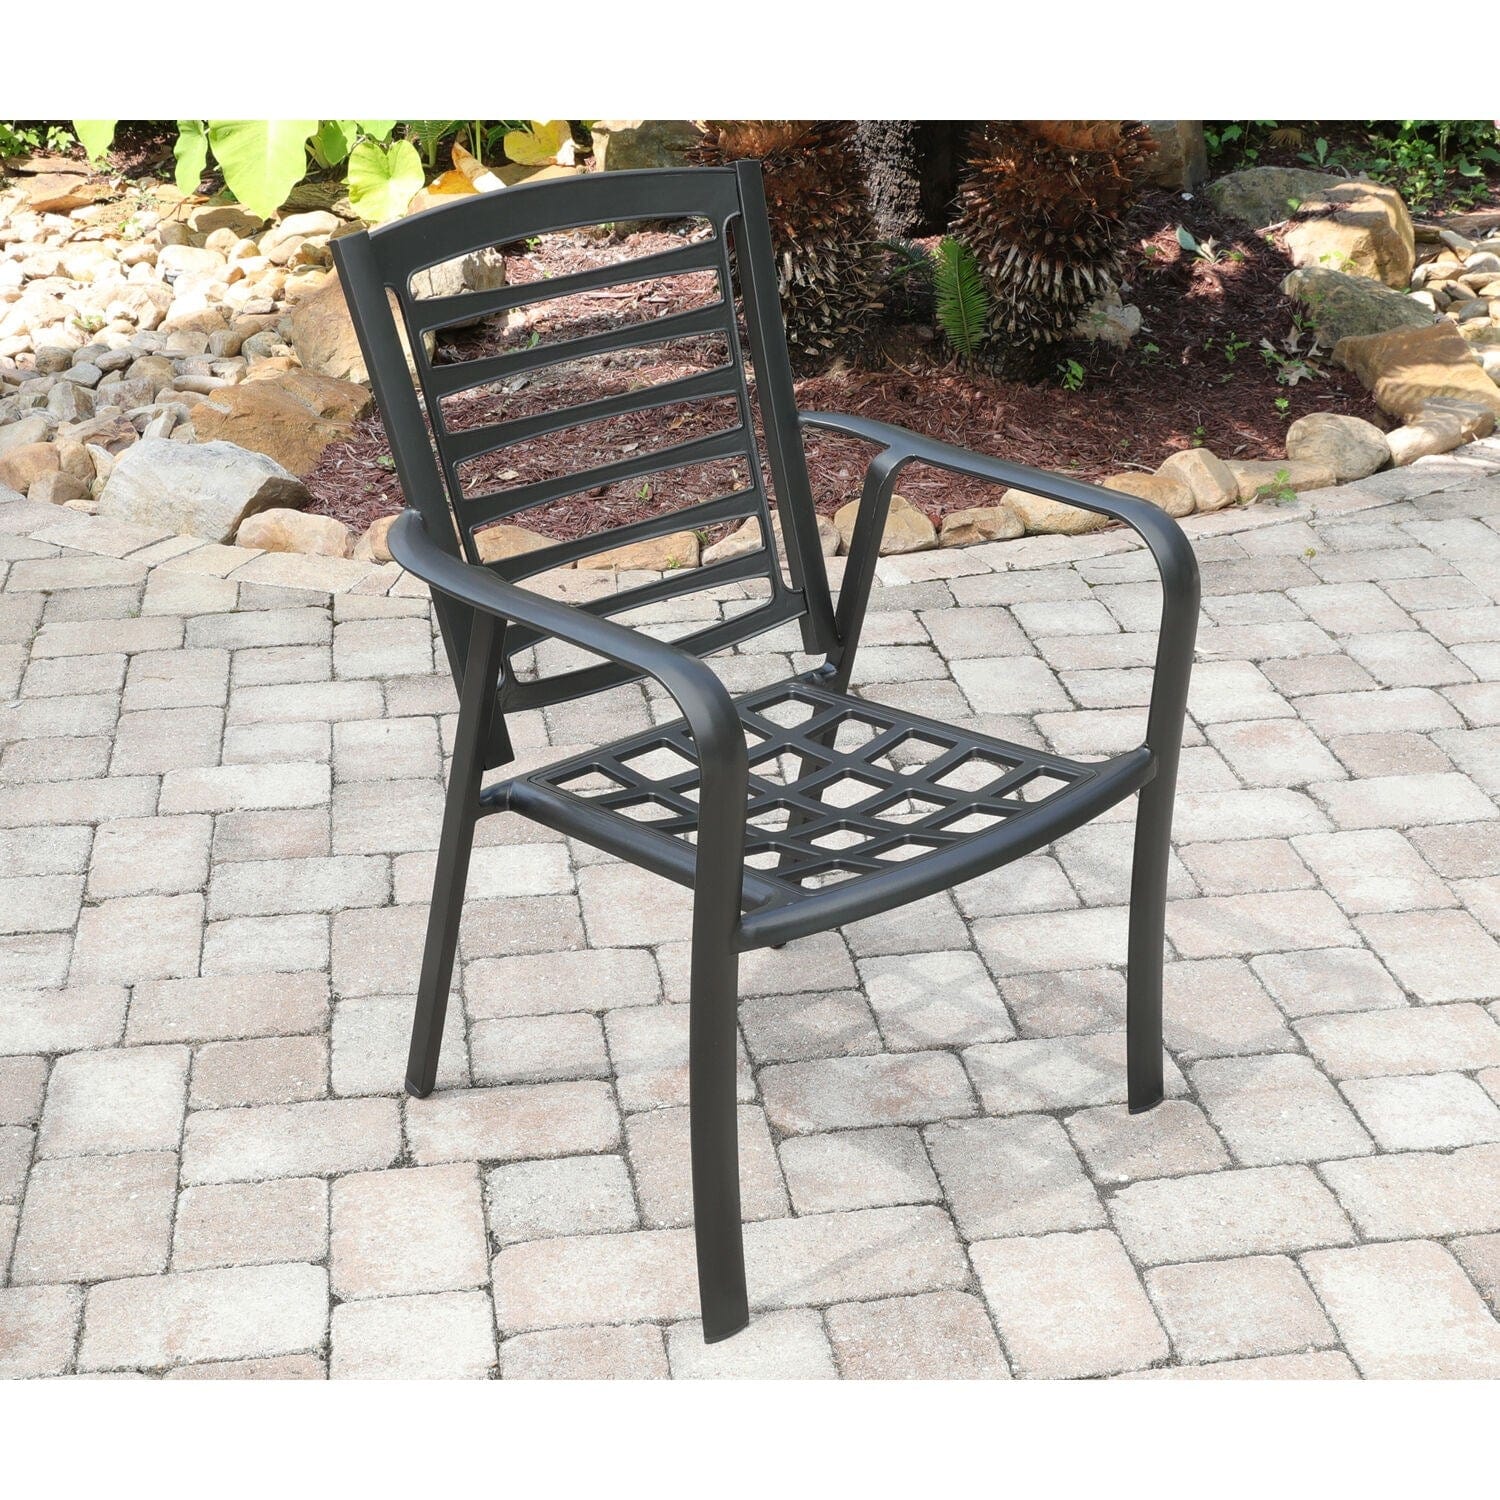 Hanover Outdoor Dining Chairs Hanover - Commercial aluminum dining chair with Sunbrella cushion - Gunmetal/Ash - PEMDNCHR-1GMASH